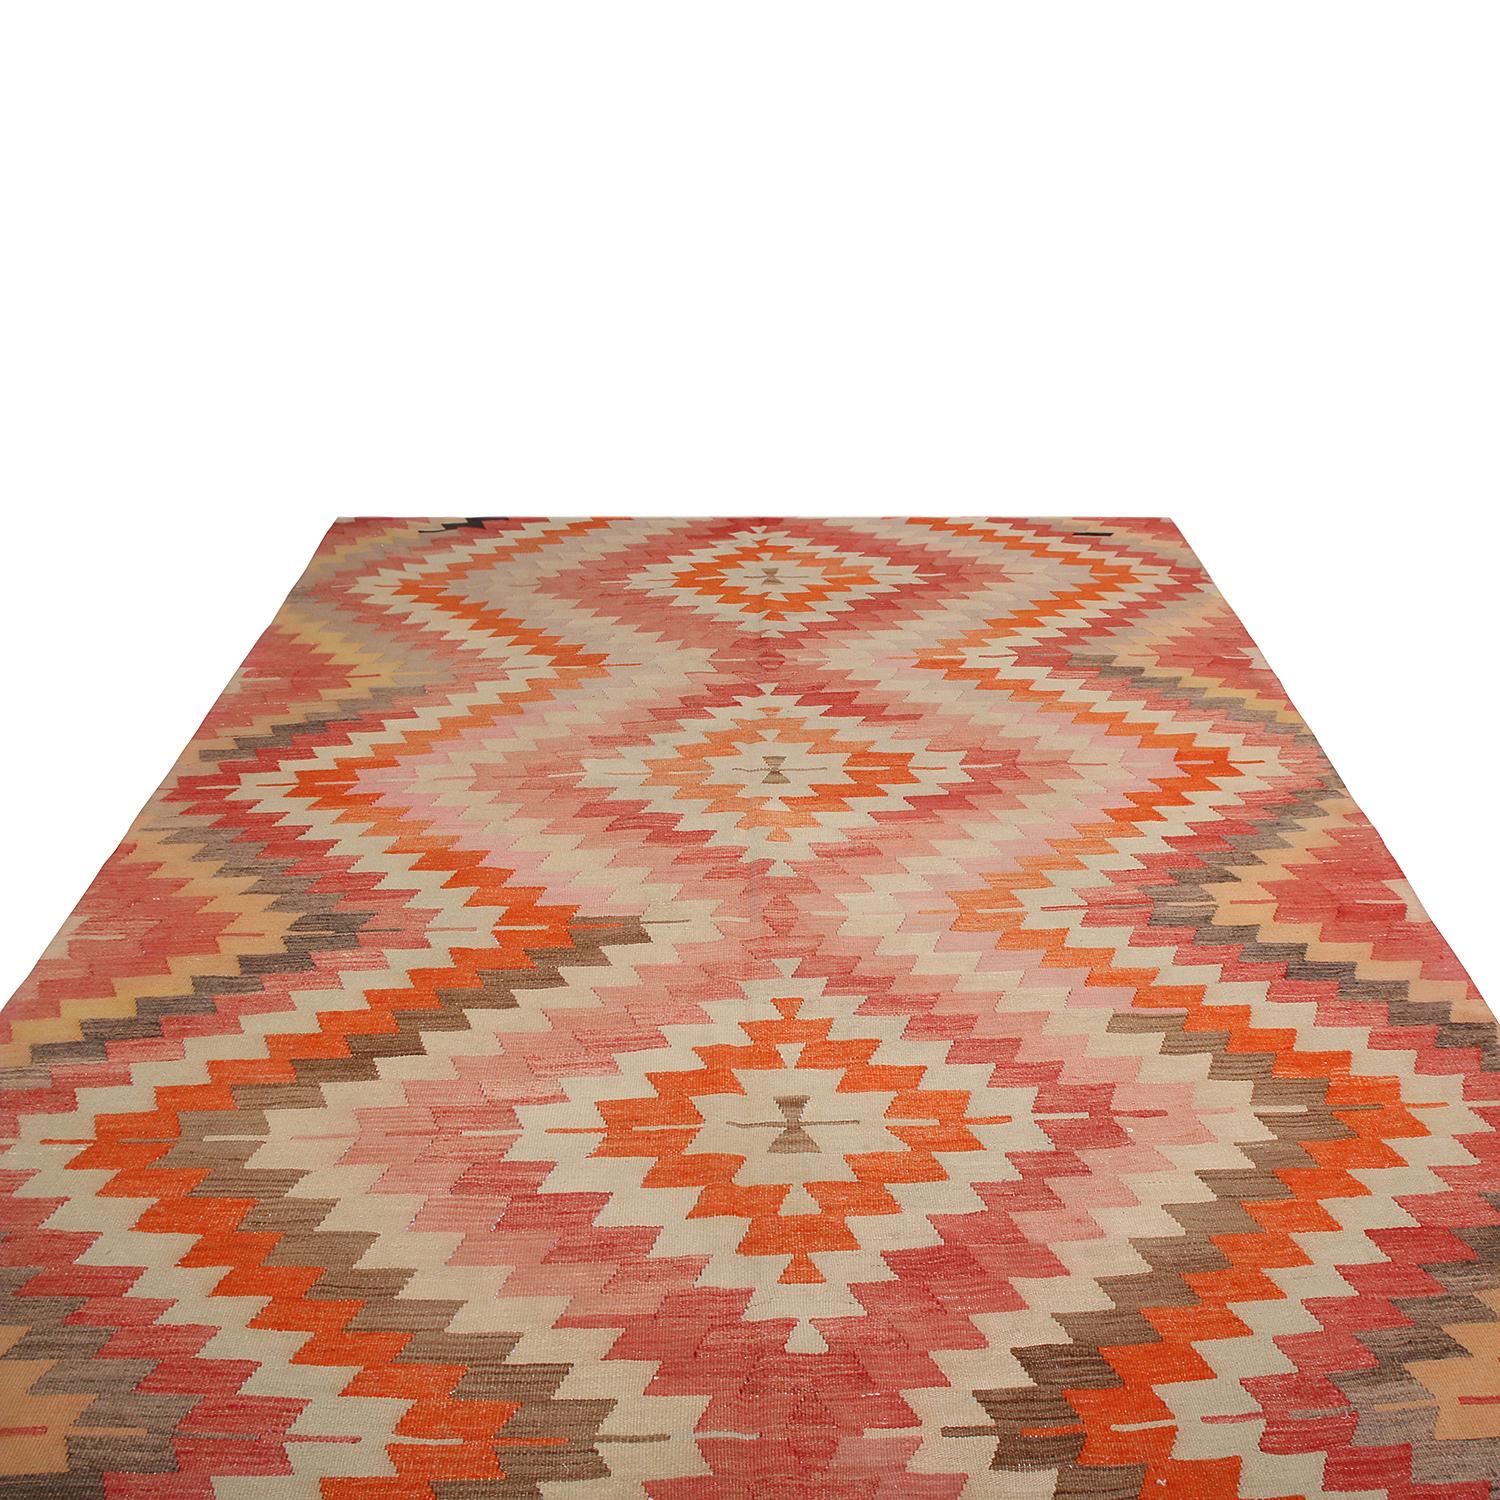 Handwoven in Turkey originating between 1950-1960, this vintage midcentury wool Kilim hails from the Afyon province, enjoying a Classic variation of the diamond pattern known to enjoy rare and entirely individualistic variations of colorway in every